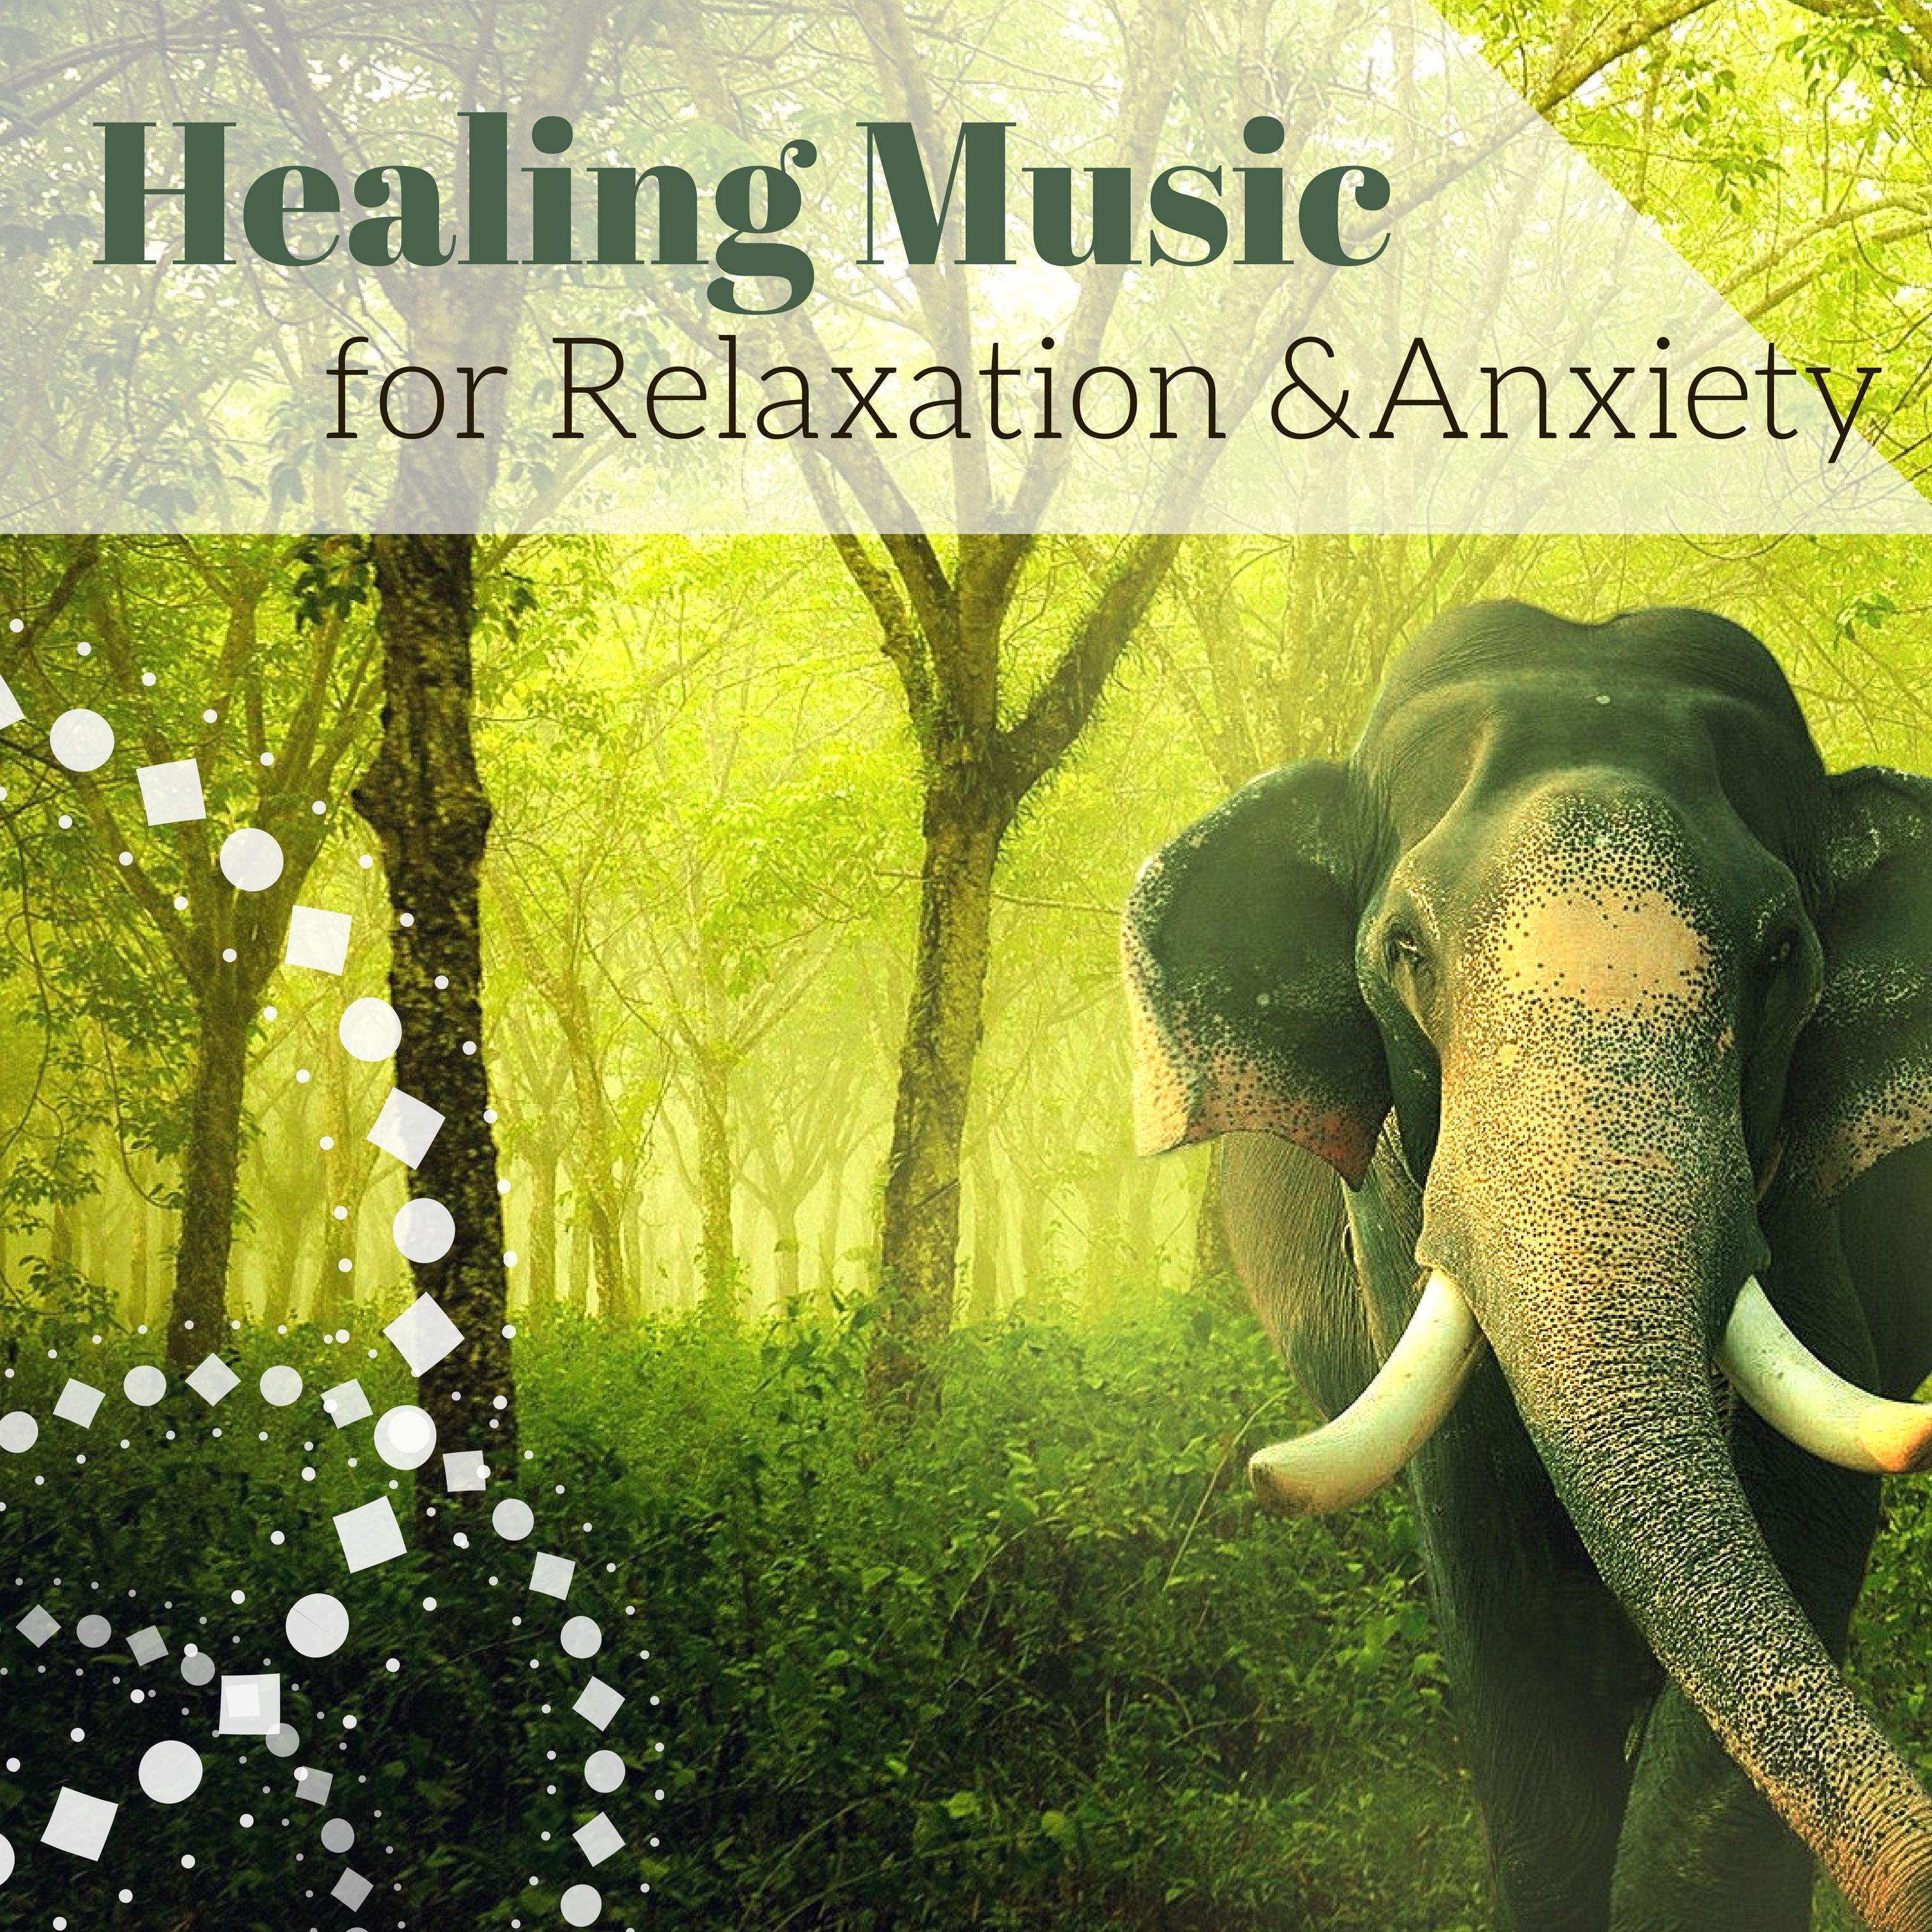 Healing Music for Relaxation & Anxiety: Guided Meditation Music, Sleep & Yoga Relaxation, Inner Peace